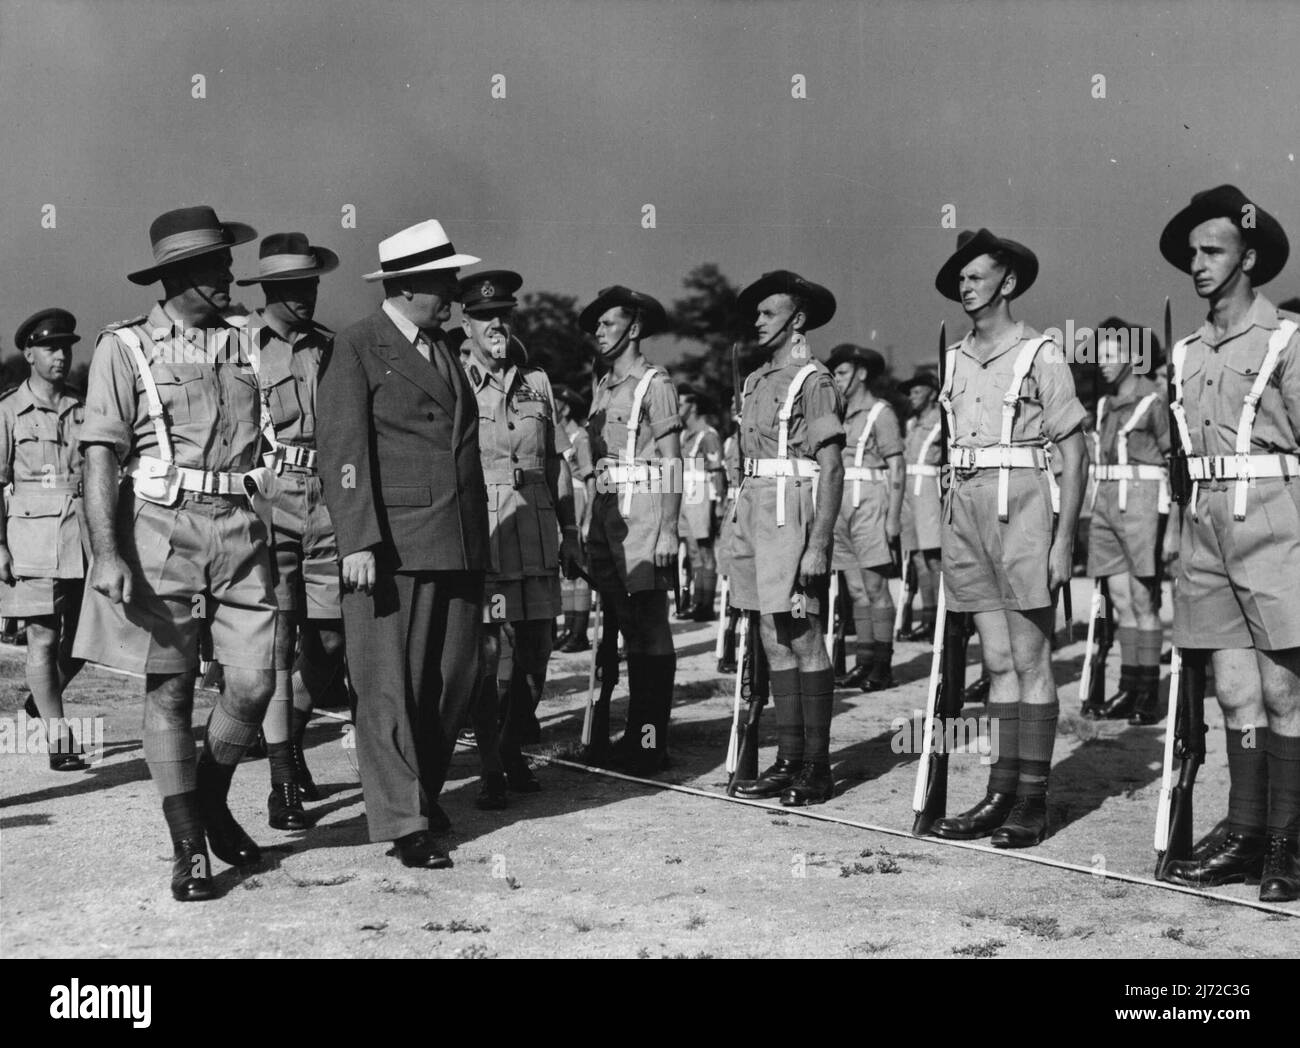 The Rt. Hon R.G. Menzies inspecting troops of Royal Aust. Army Service Corps. Left to right; Lt. Col. Fairclough commanding officer RAASC Lt-Col. F.S. Walsh Parade Commander. The Rt. Hon. R.G. Menzies, C-in-C BCOF Lt. Gen. Sir Horace Robertson. The Australian Prime minister, The Rt. Hon. R.G. Menzies, today inspected troops of the British Commonwealth Occupations Force at a parade on Anzac Park, Kure, Japan, on 16 August '50. August 16, 1950. (Photo by Public Relations Section HQ BCOF). Stock Photo